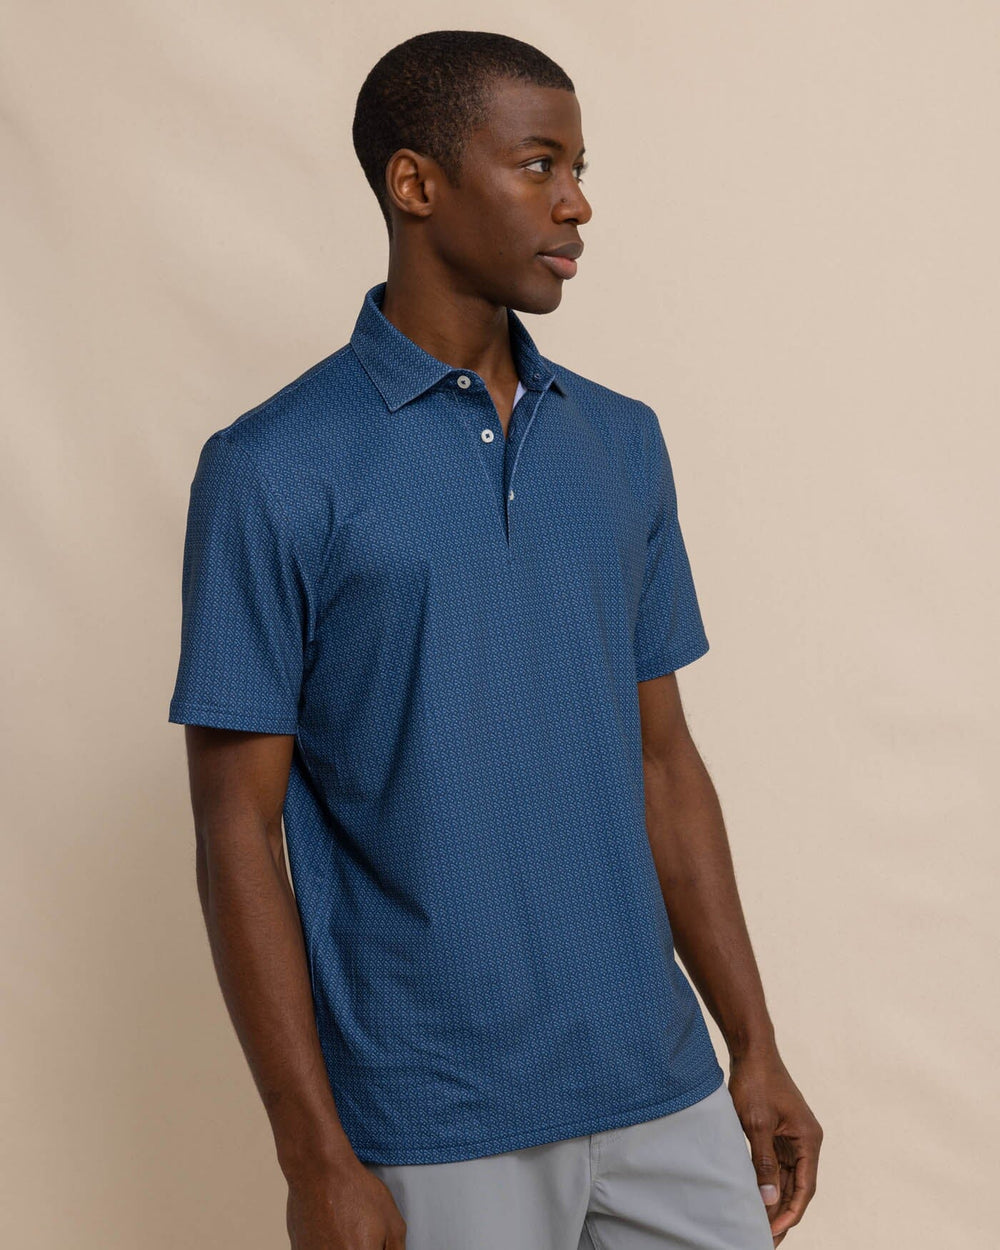 The front view of the Southern Tide Driver Clubbin It Printed Polo by Southern Tide - Aged Denim